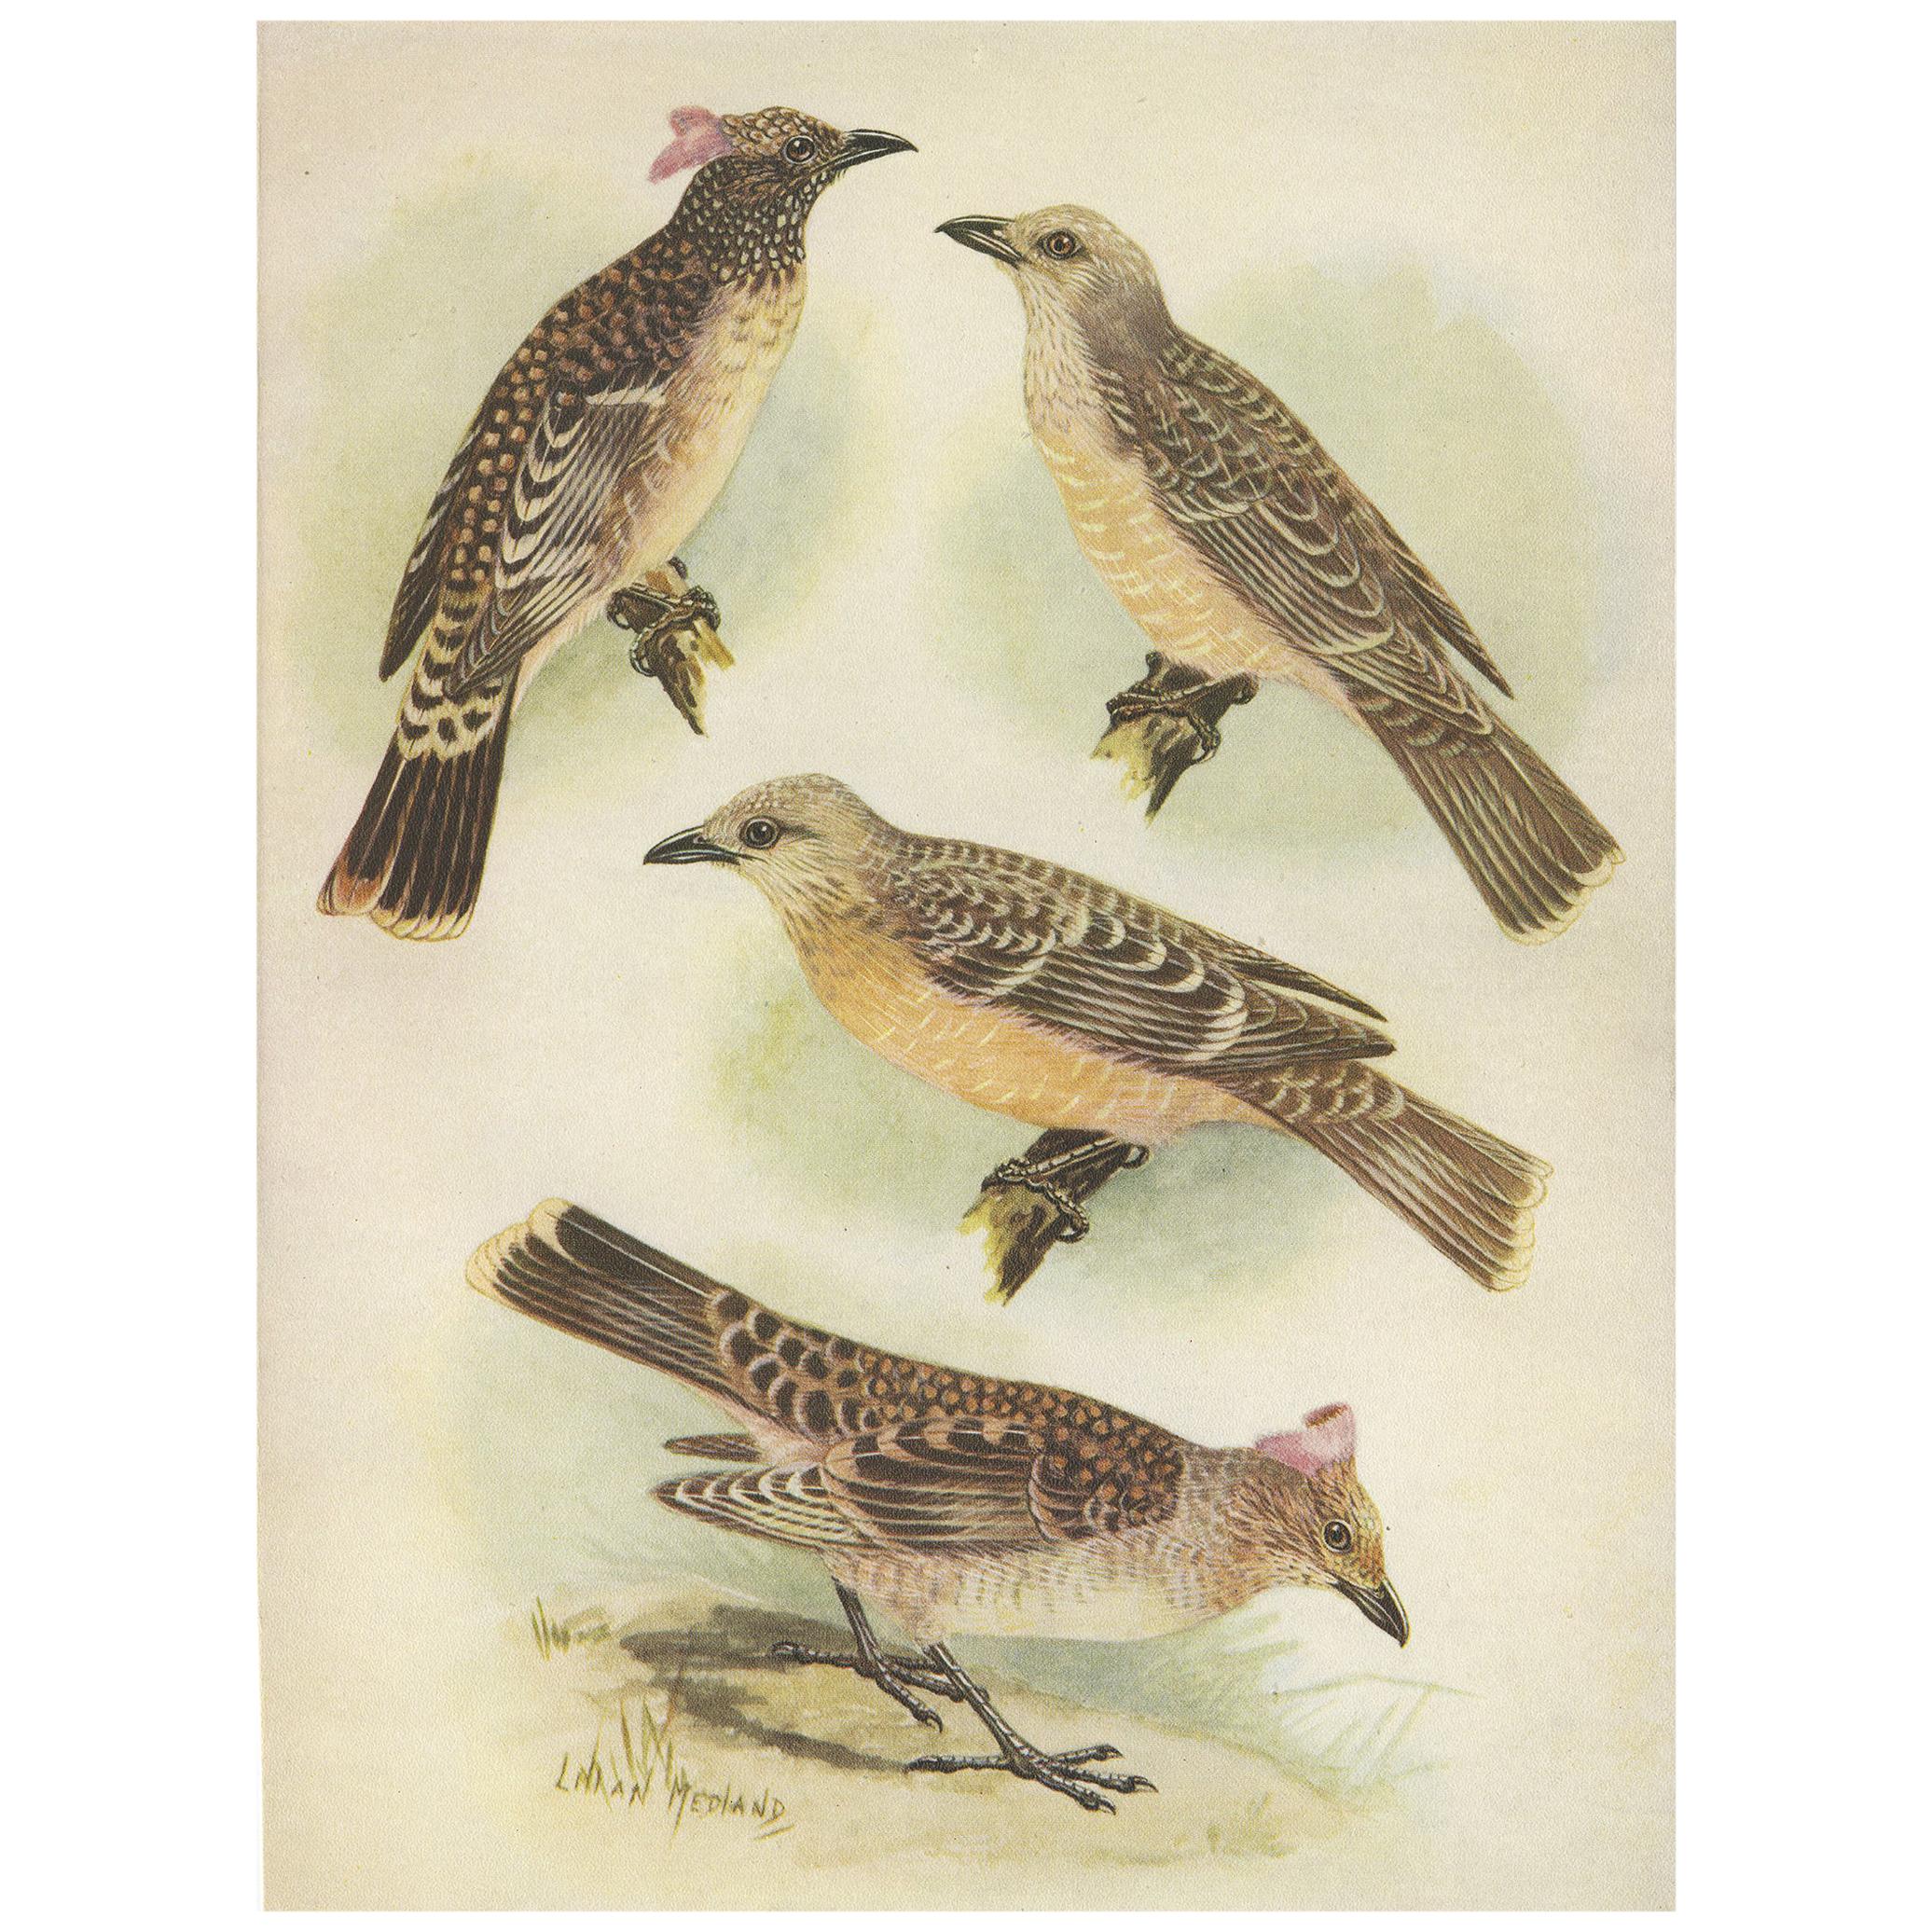 Antique Print of the Spotted Bower Bird and Fawn-Breasted Bower Bird, 1950